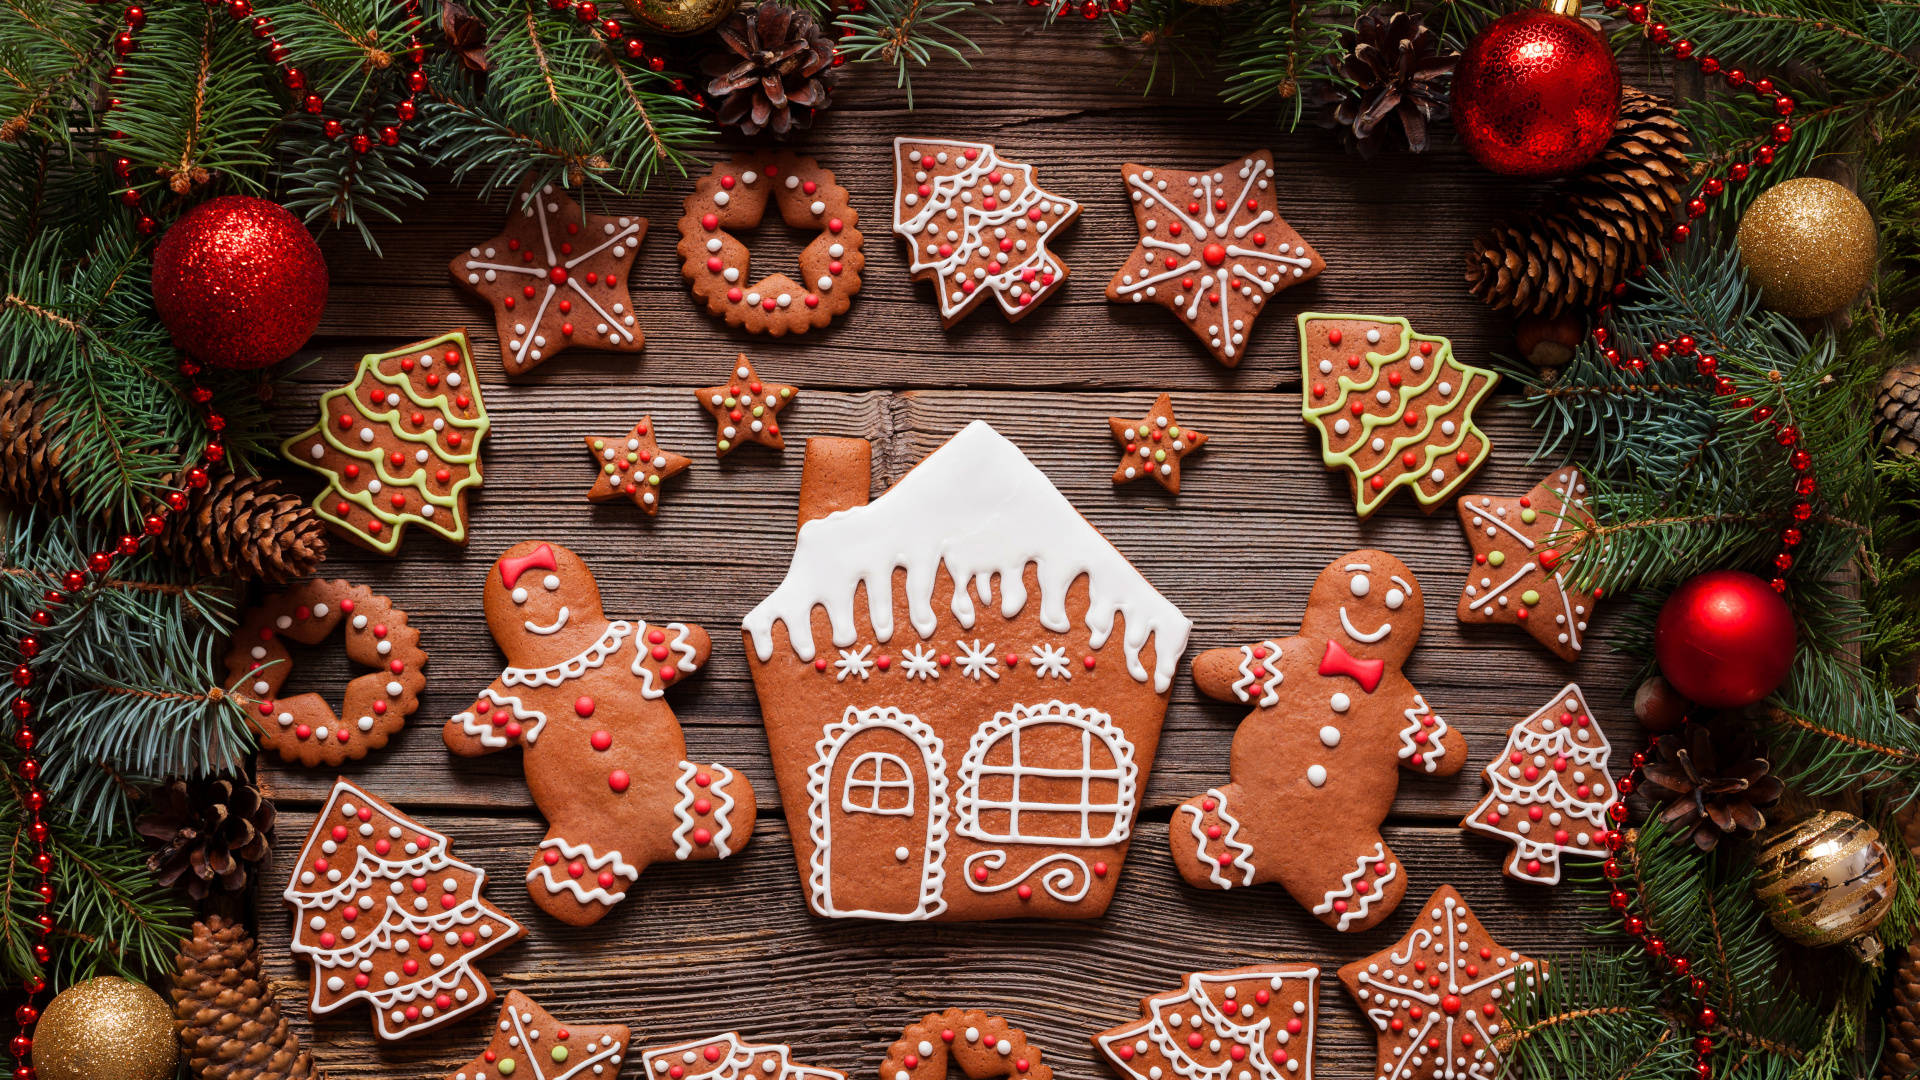 3d Render Of A Gingerbread House In A Winter Wonderland Background  Christmas Cake Christmas Gingerbread Gingerbread Background Image And  Wallpaper for Free Download